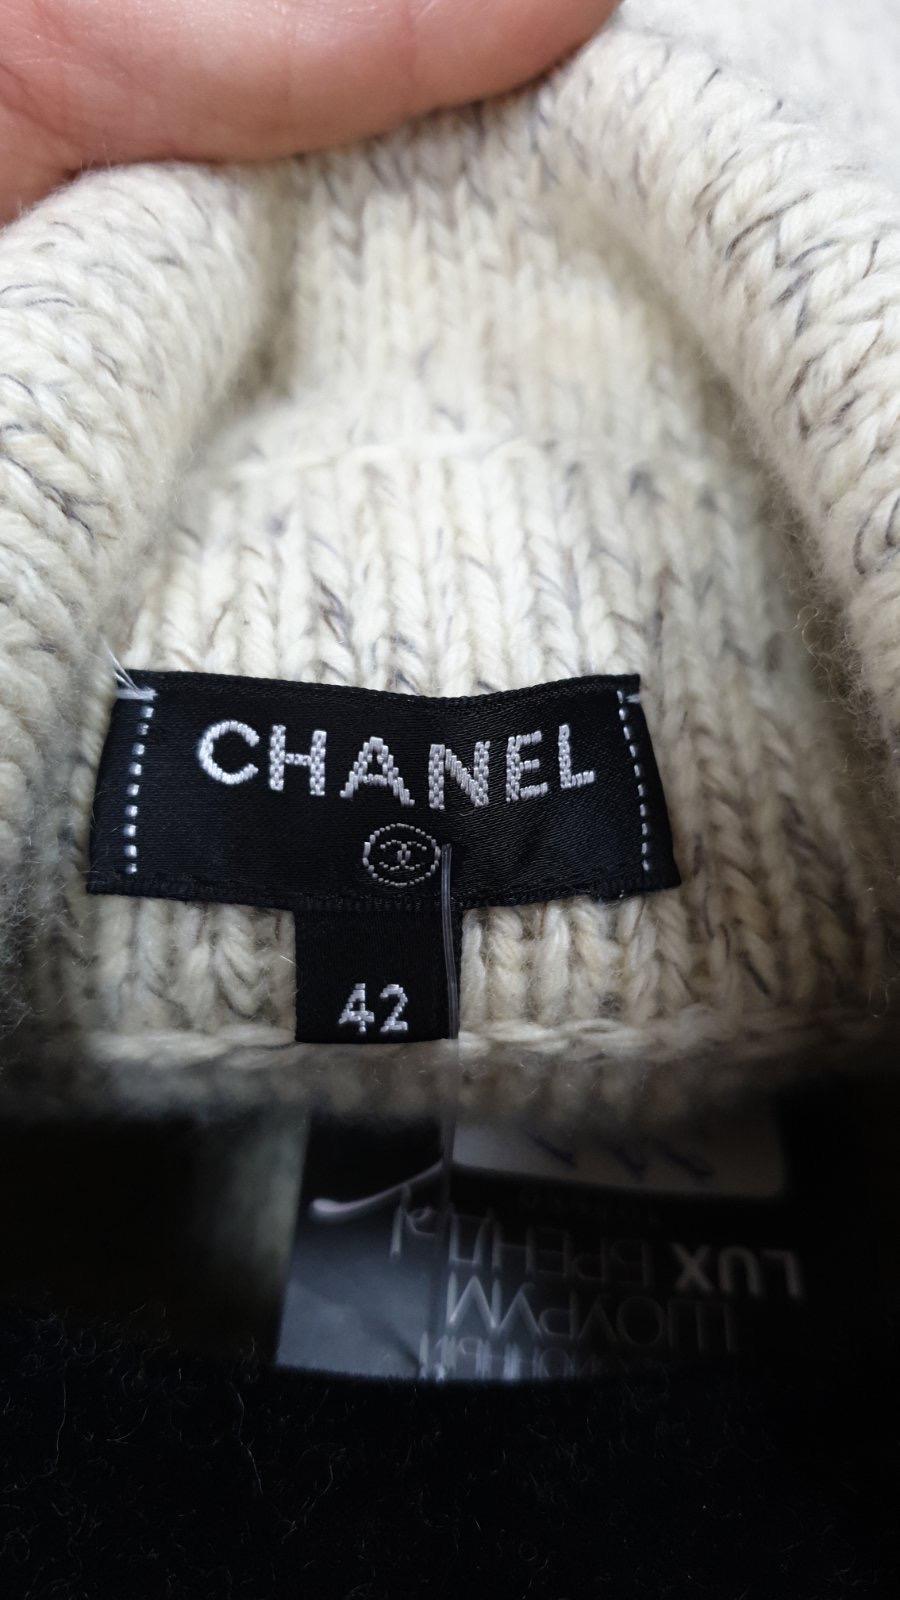 Chanel cashmere-blend sweater coat with CC logo buttons.
 It is adorned with a front button closure and 2 front pockets. 
This is new, never worn.

Sz.42 (runs smaller)
Hanger is not included